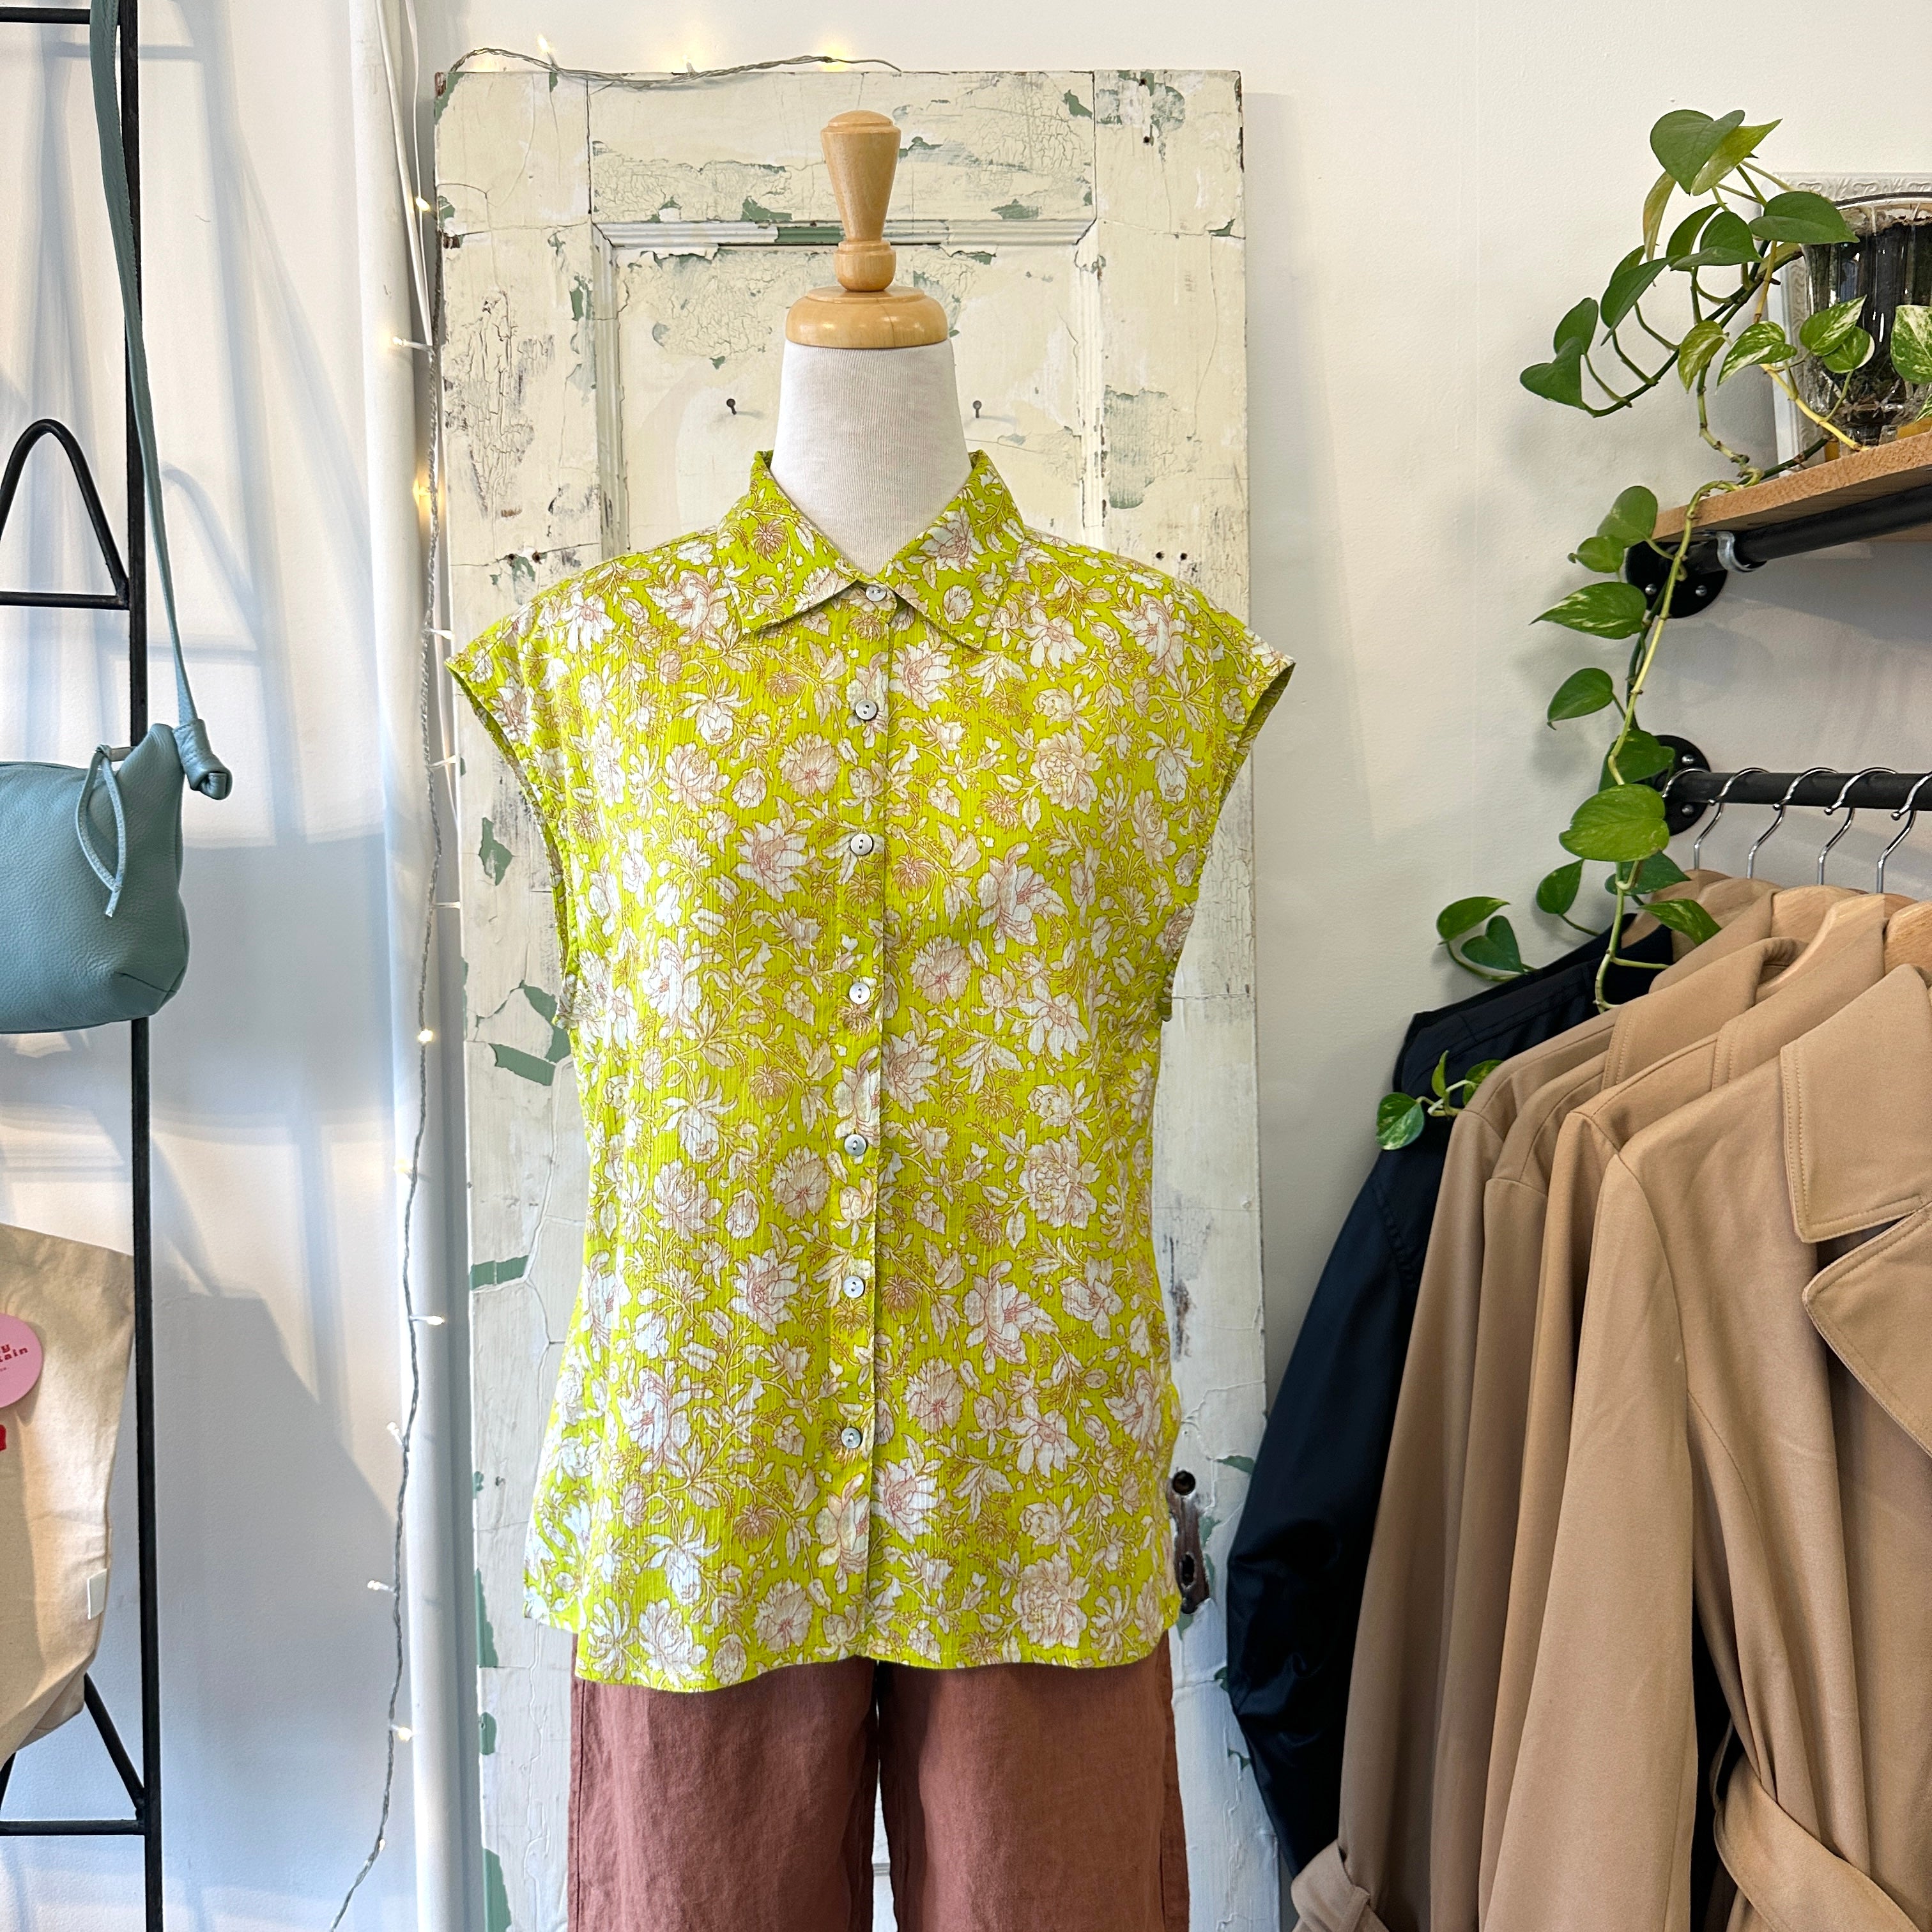 Indi & Cold // Lime Floral Print Button-Up Blouse